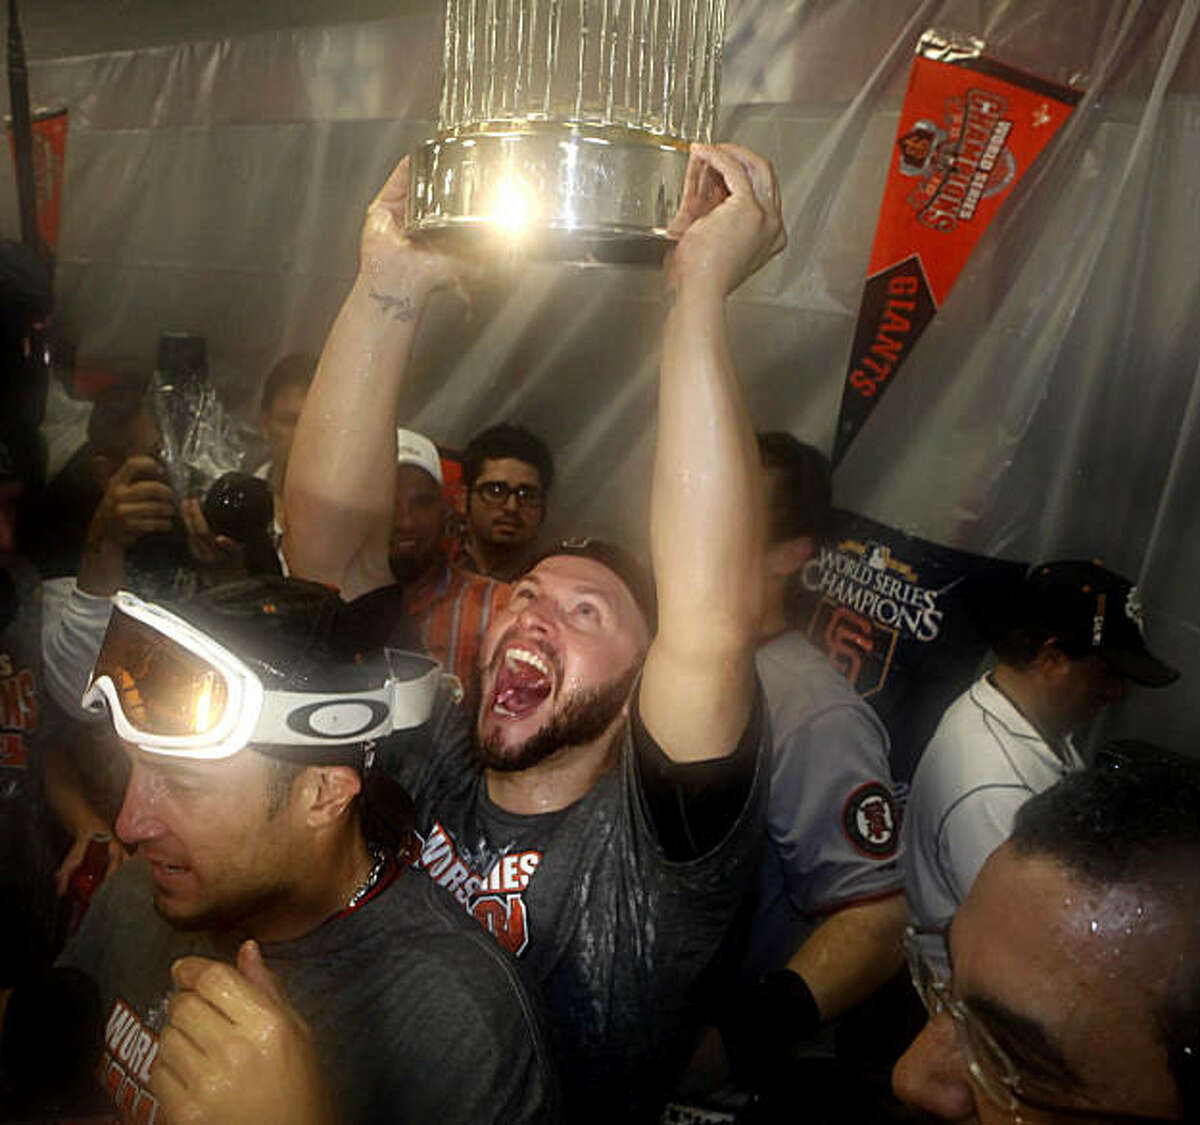 San Francisco Giants' Cody Ross (13) lifts the 2010 World Series Championship trophy over his head in the Visiting Clubhouse at Rangers Ballpark after the San Francisco Giants win Game 5 of the World Series over the Texas Rangers 3-1 on Monday November 1, 2010 in Arlington, Texas.